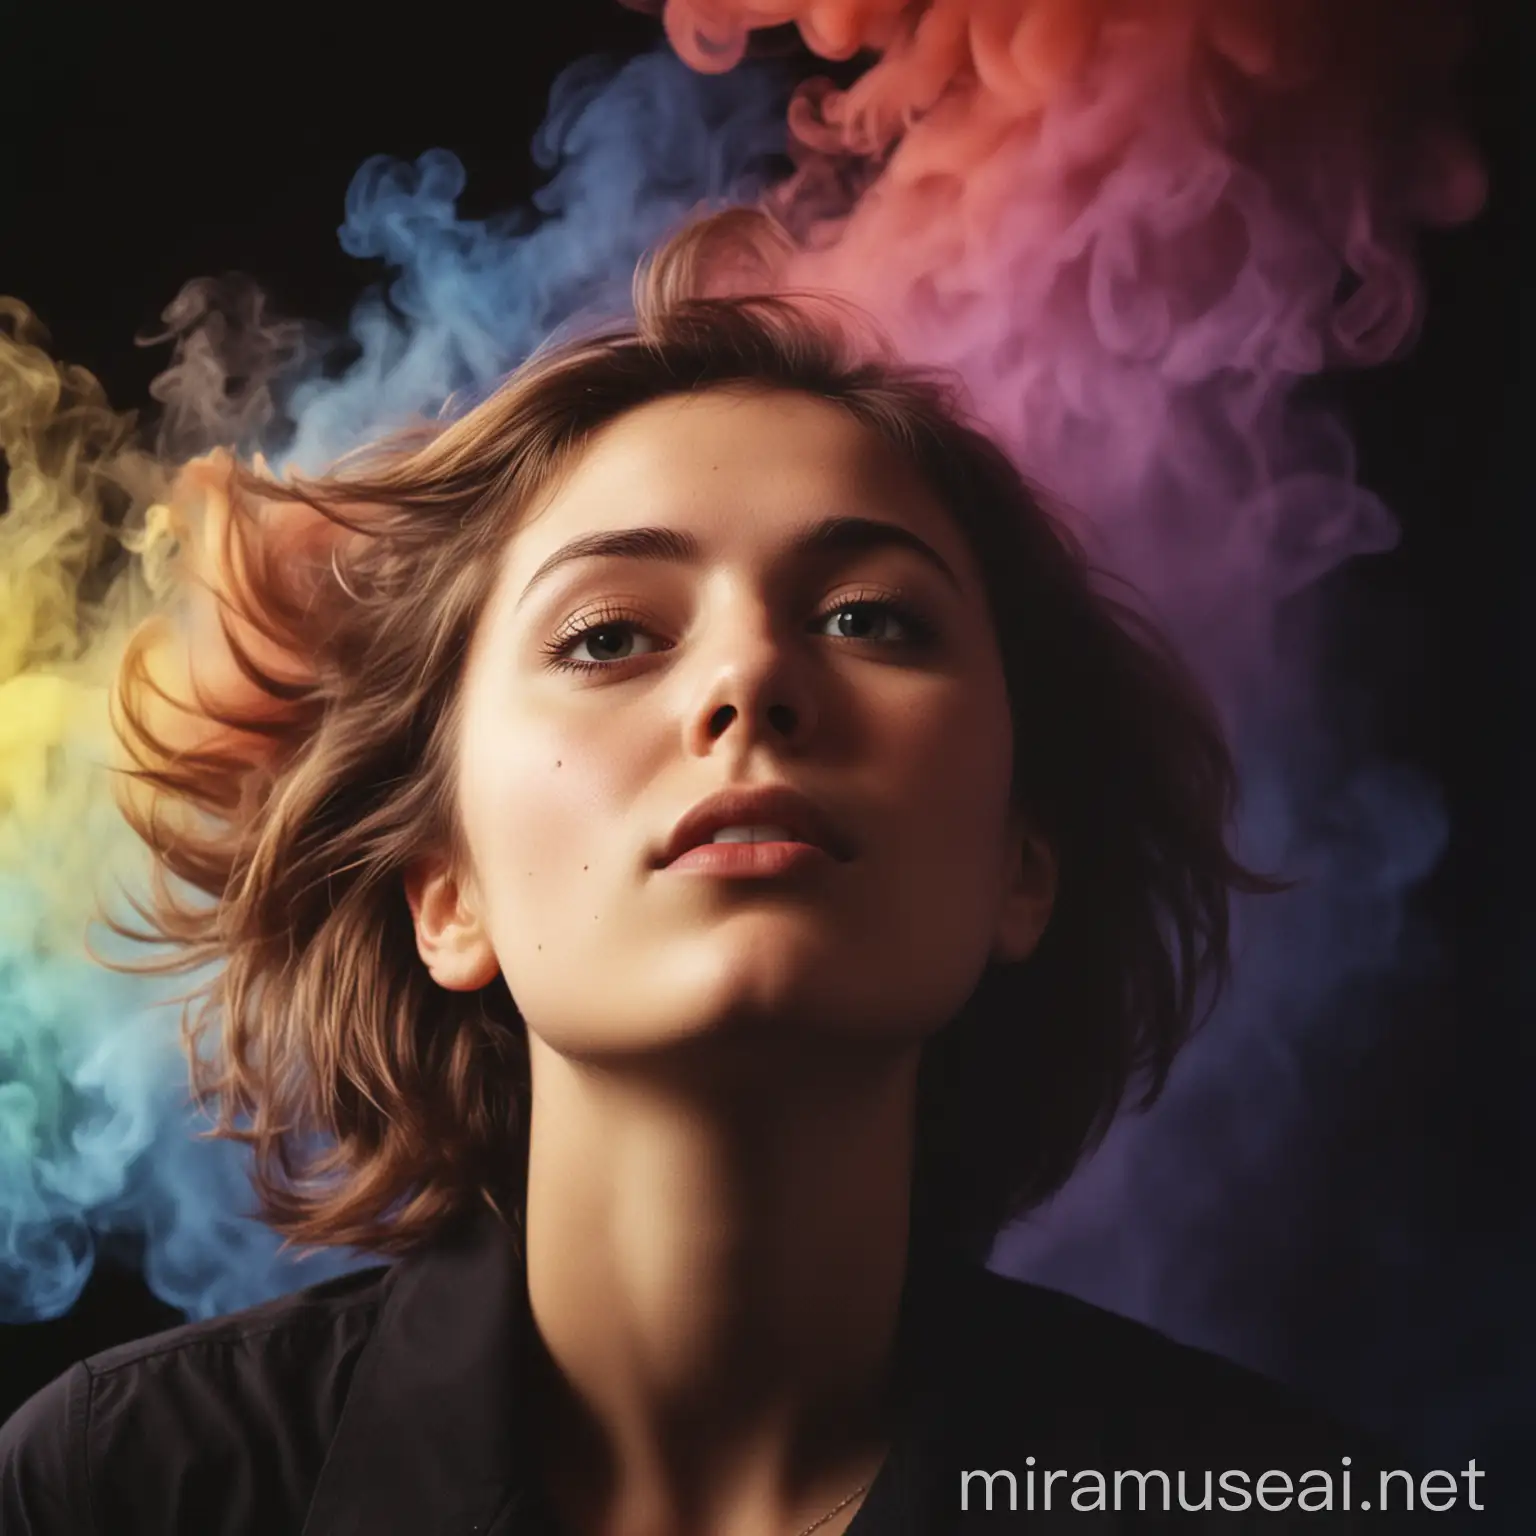 Contemplative Young Woman Amidst Colorful Smoke on Noir Background